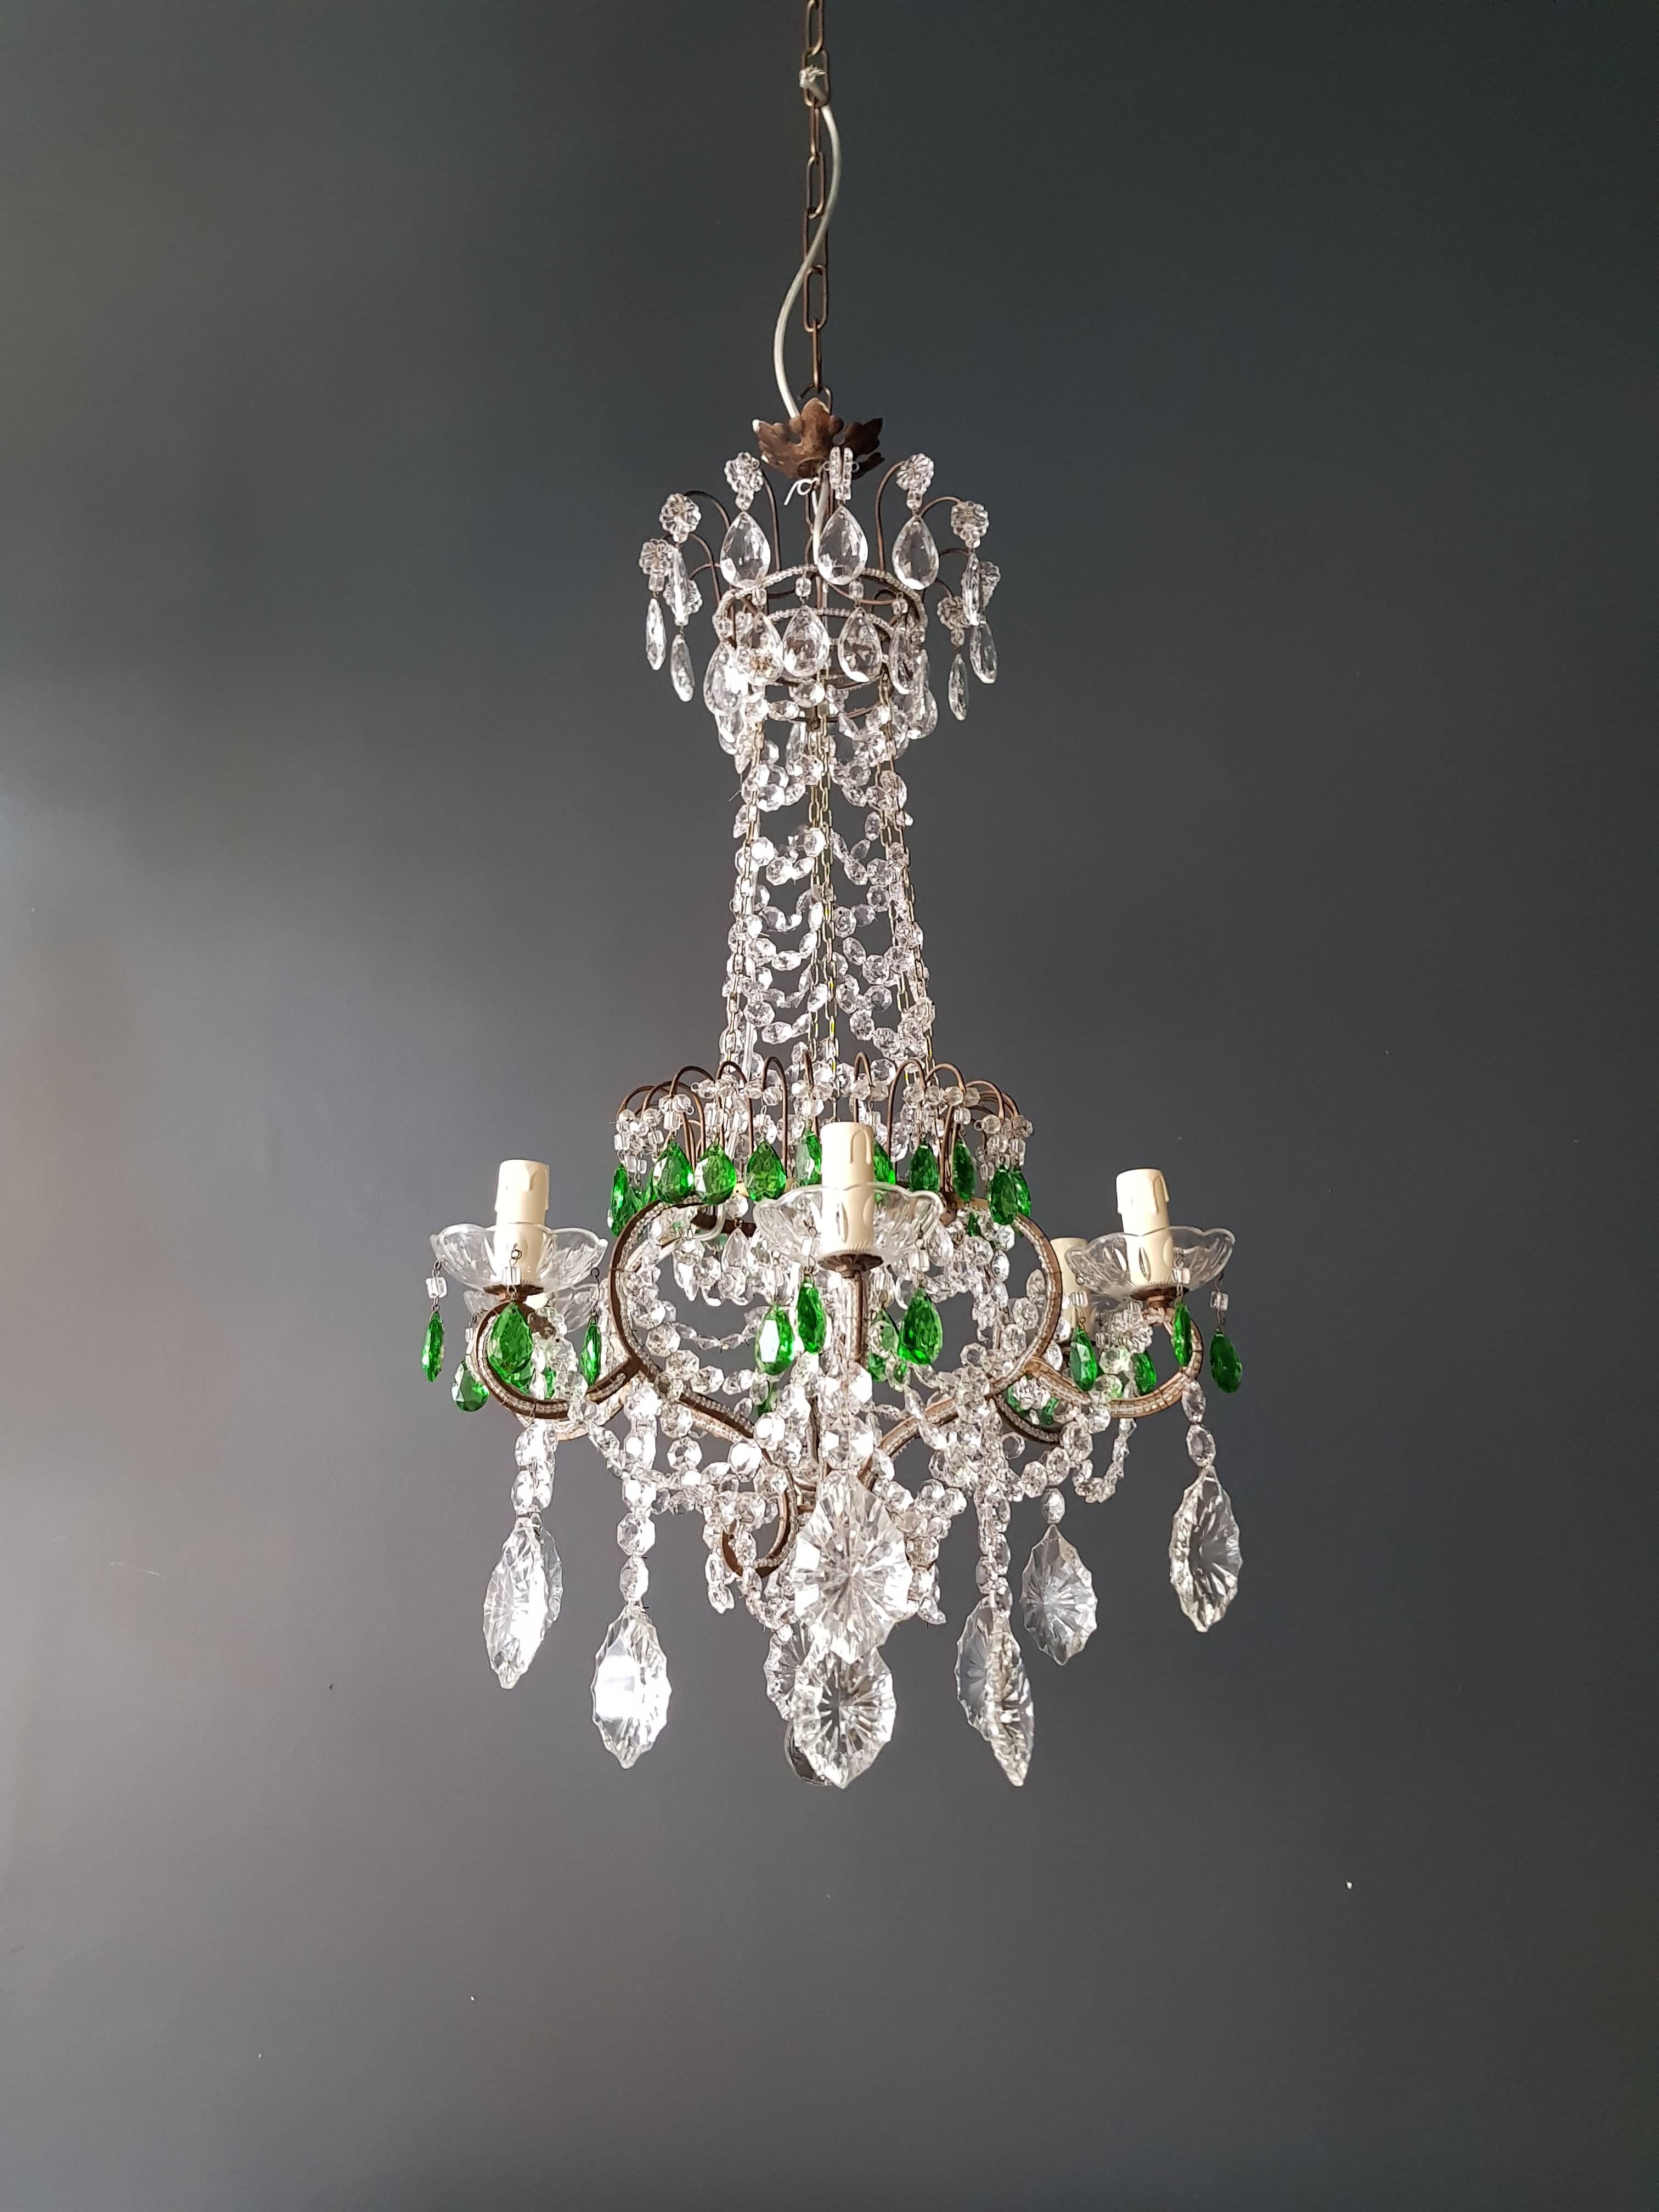 Green antique 1900s chandelier crystal lustre ceiling lamp rarity neoclassical
original antique preserved crystal chandelier, circa 1900. Cabling and sockets completely renewed. Crystal hand-knotted
Measure: Total height 130cm, height without